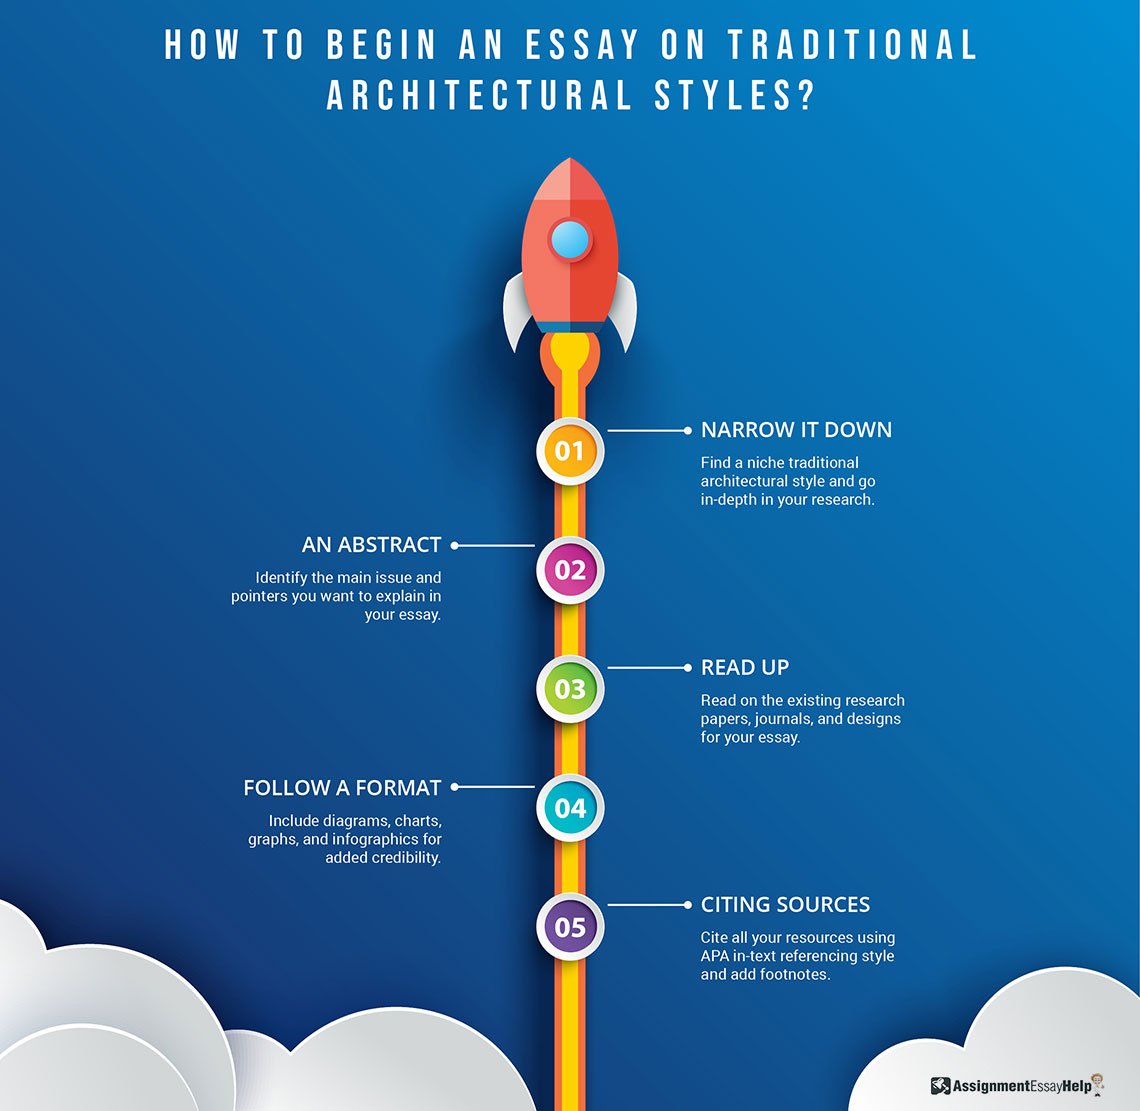 How to begin an essay on Traditional Architectural Styles